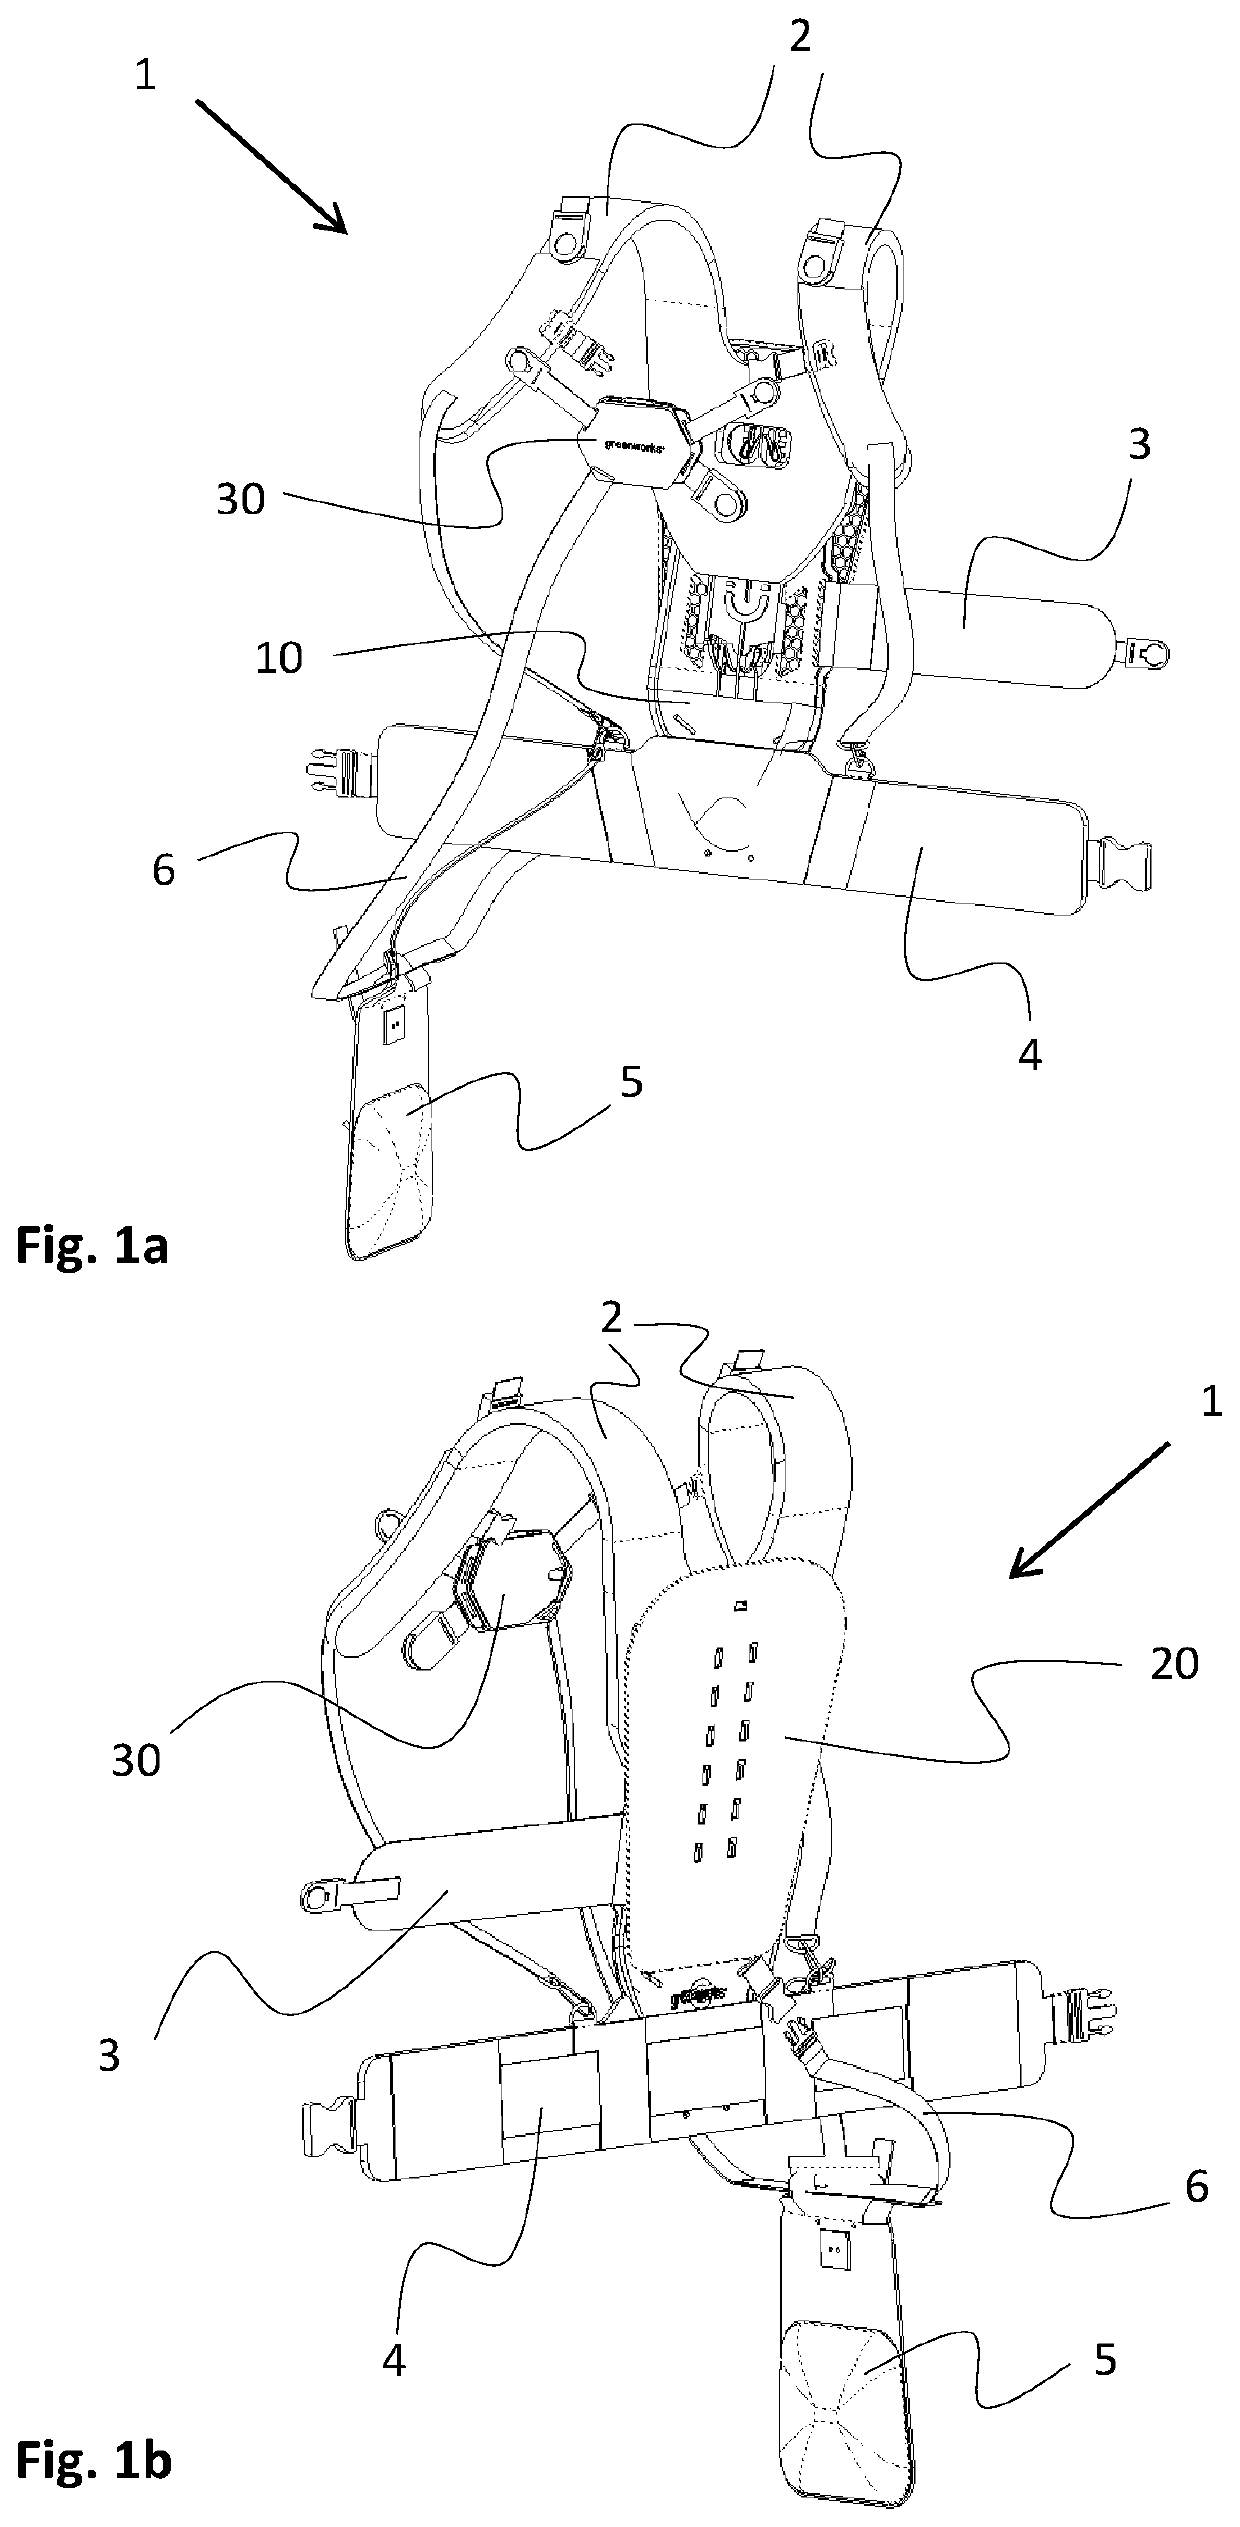 Pivotal carrier assembly for a harness